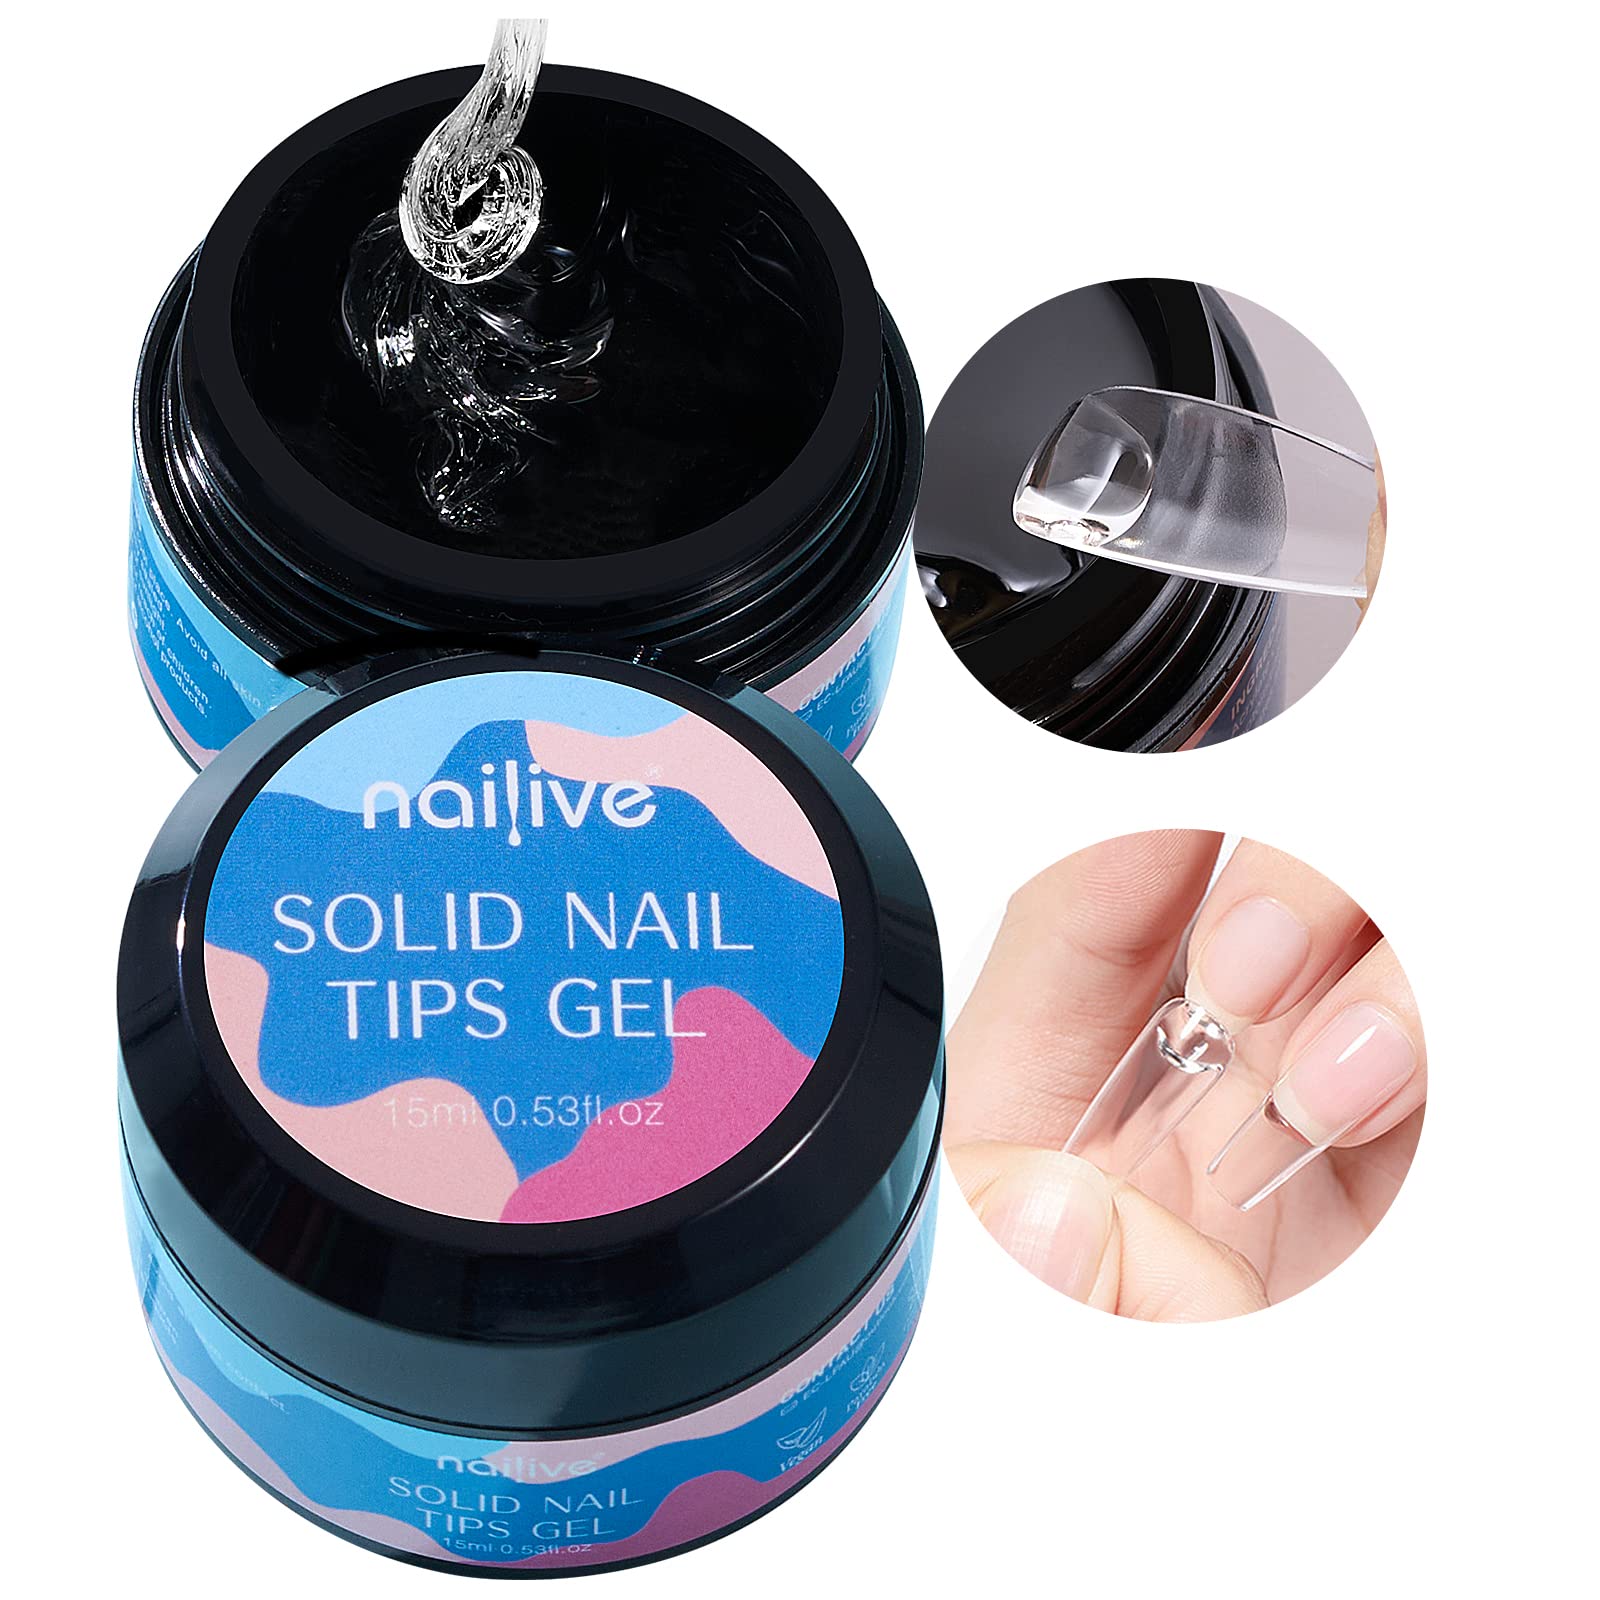 Nailive Solid Nail Glue Gel, 3 in 1 Nail Tips Glue Curing for